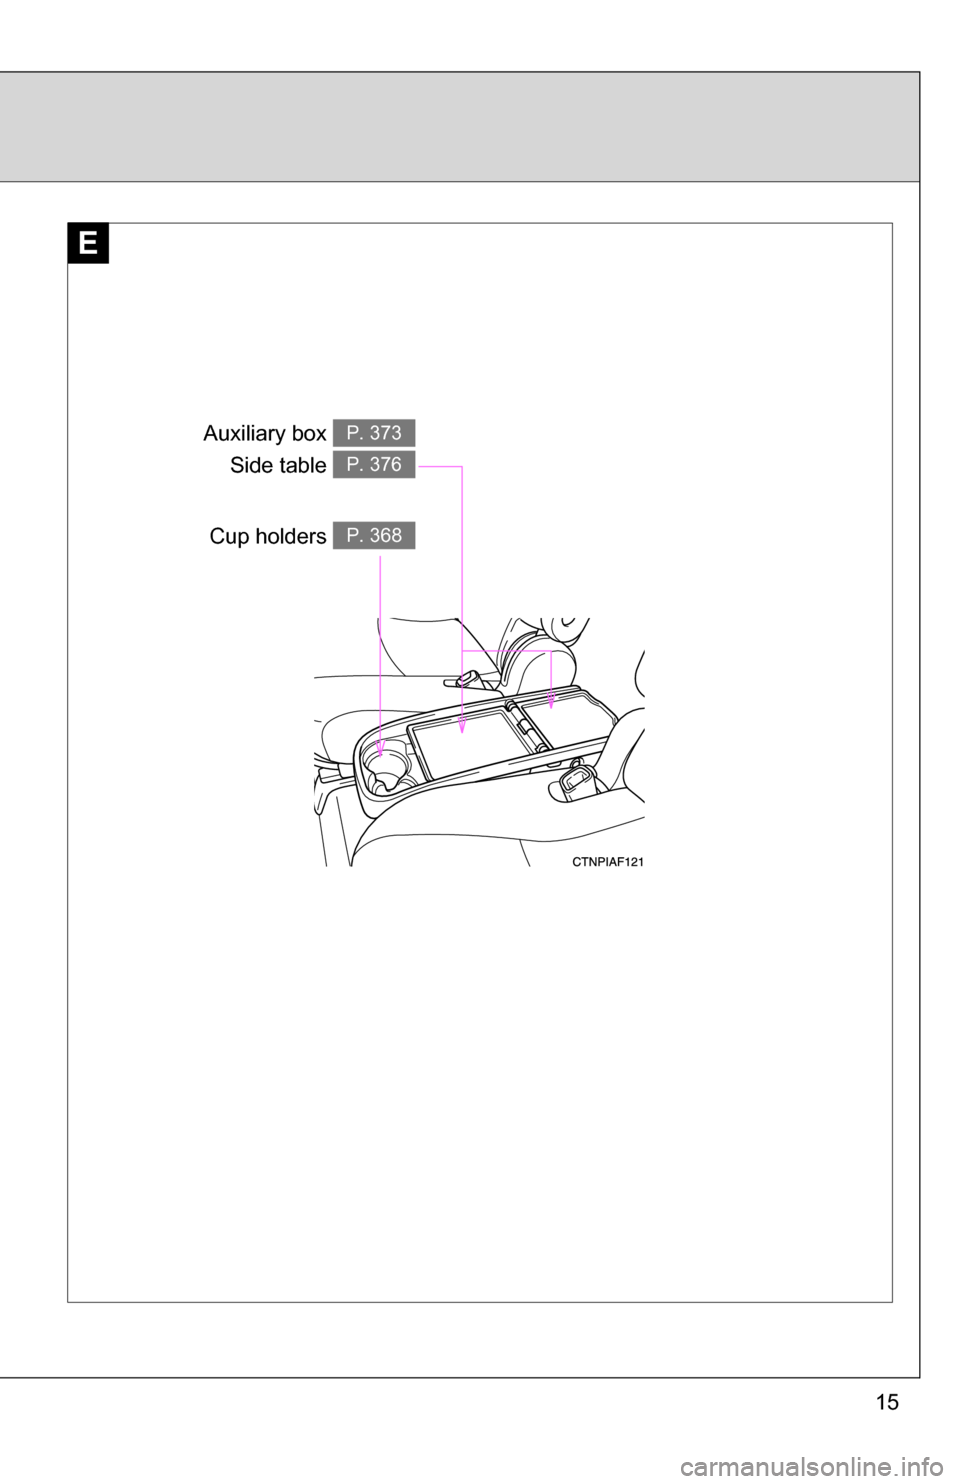 TOYOTA HIGHLANDER HYBRID 2008 XU40 / 2.G User Guide 15
E
Auxiliary box Side table P. 373
P. 376
Cup holders P. 368 